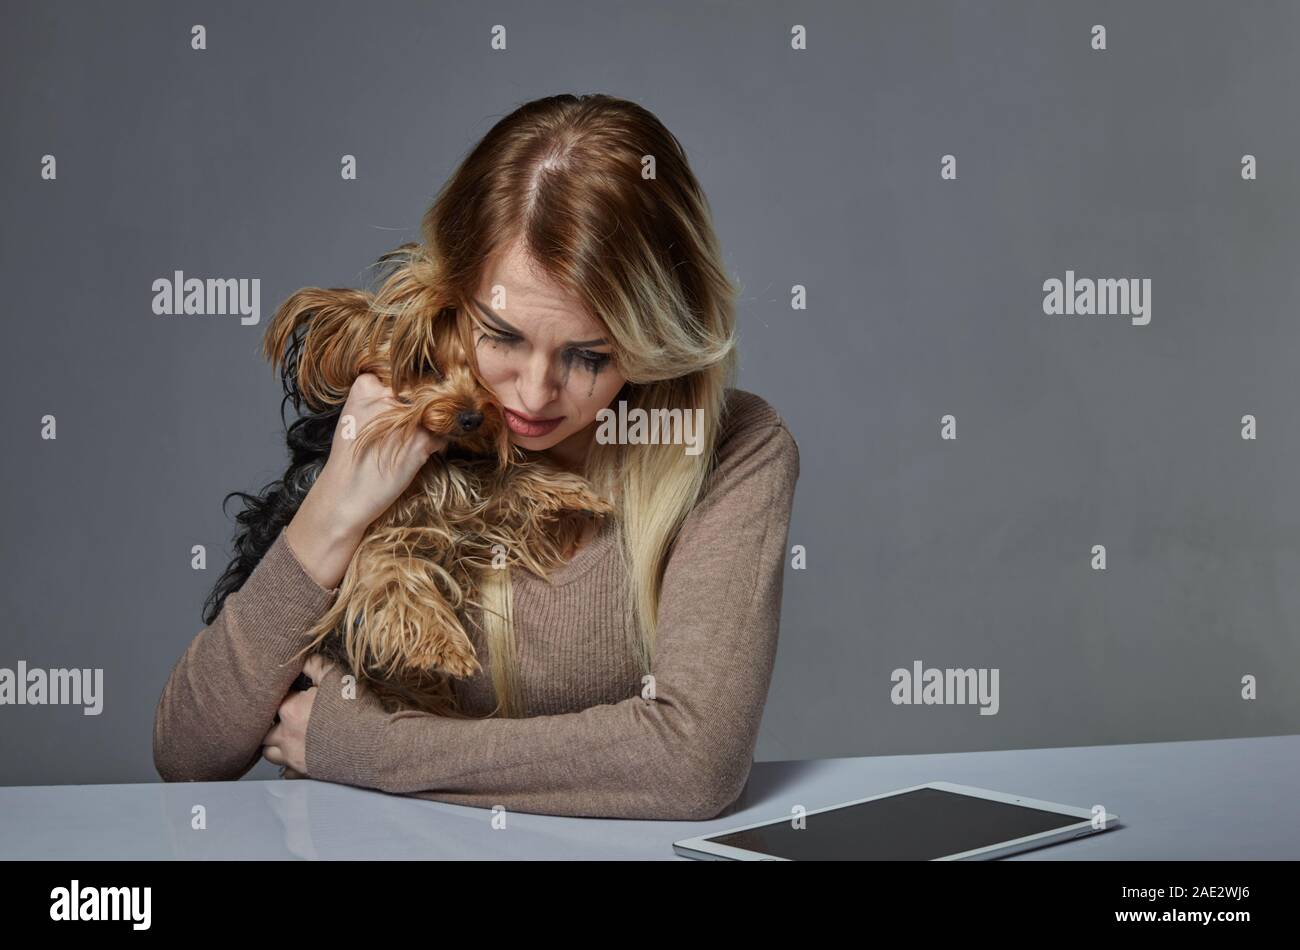 Woman with dog suffering from stress Stock Photo